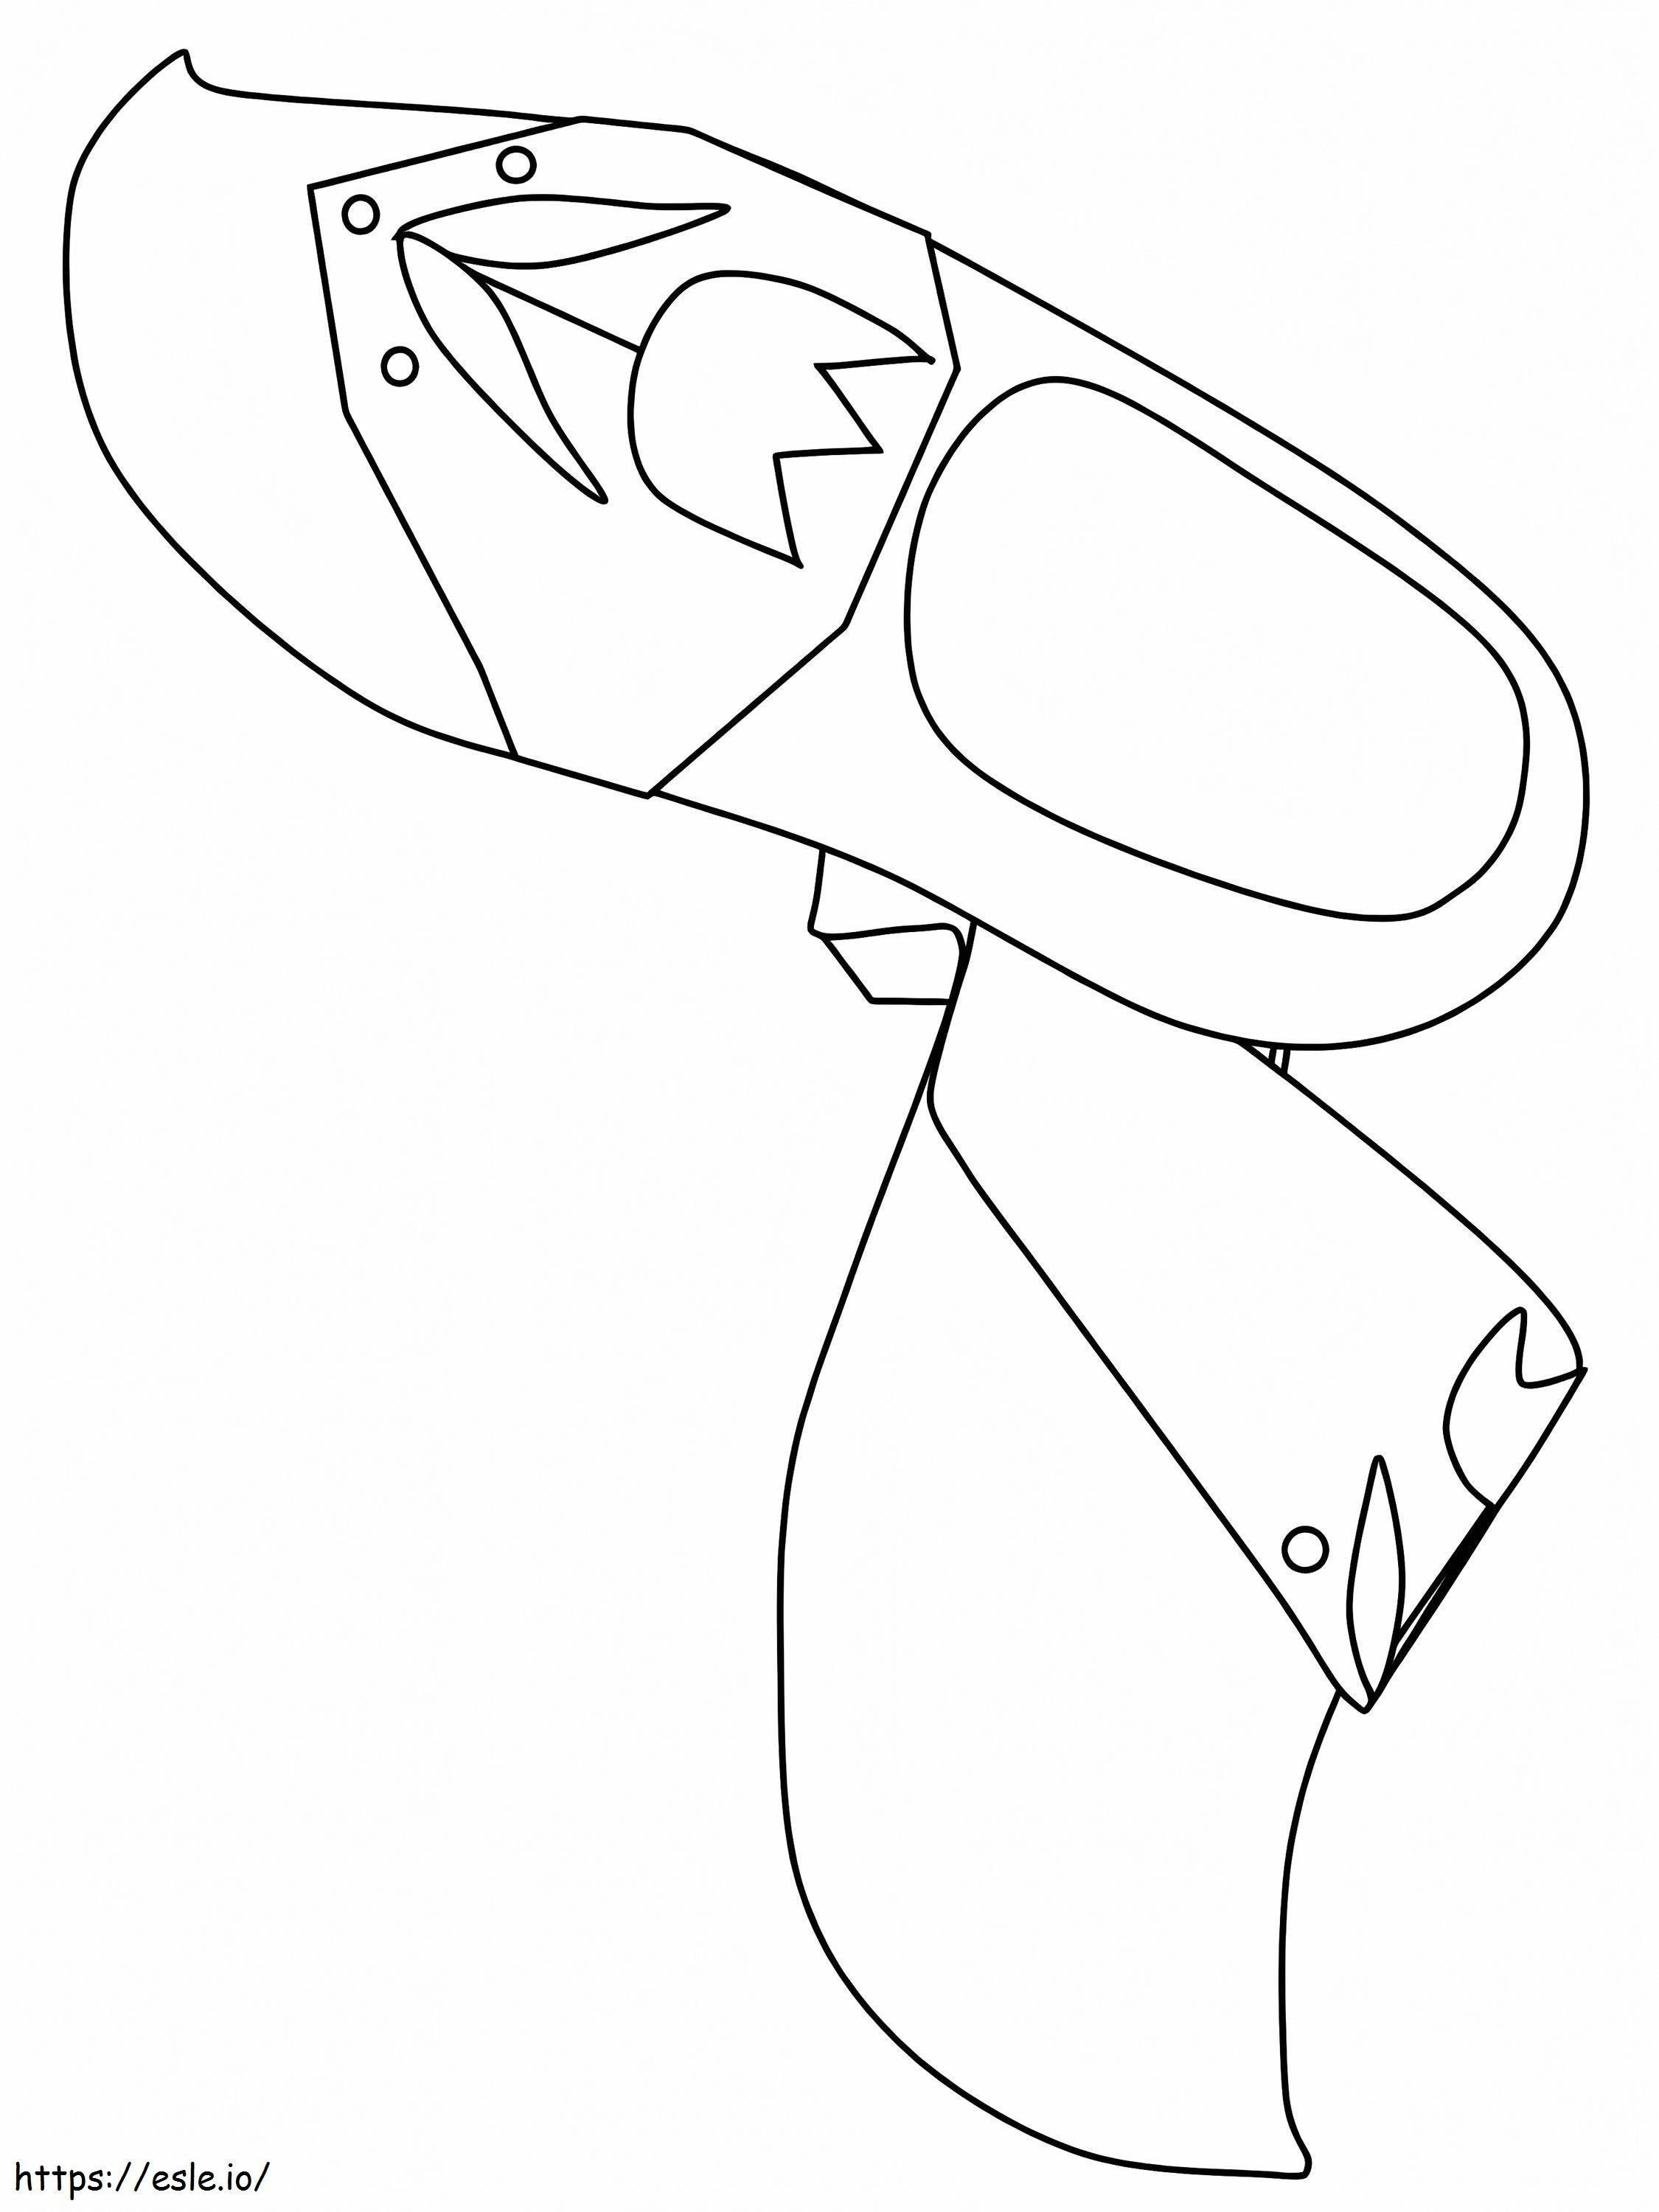 Clump 1 coloring page